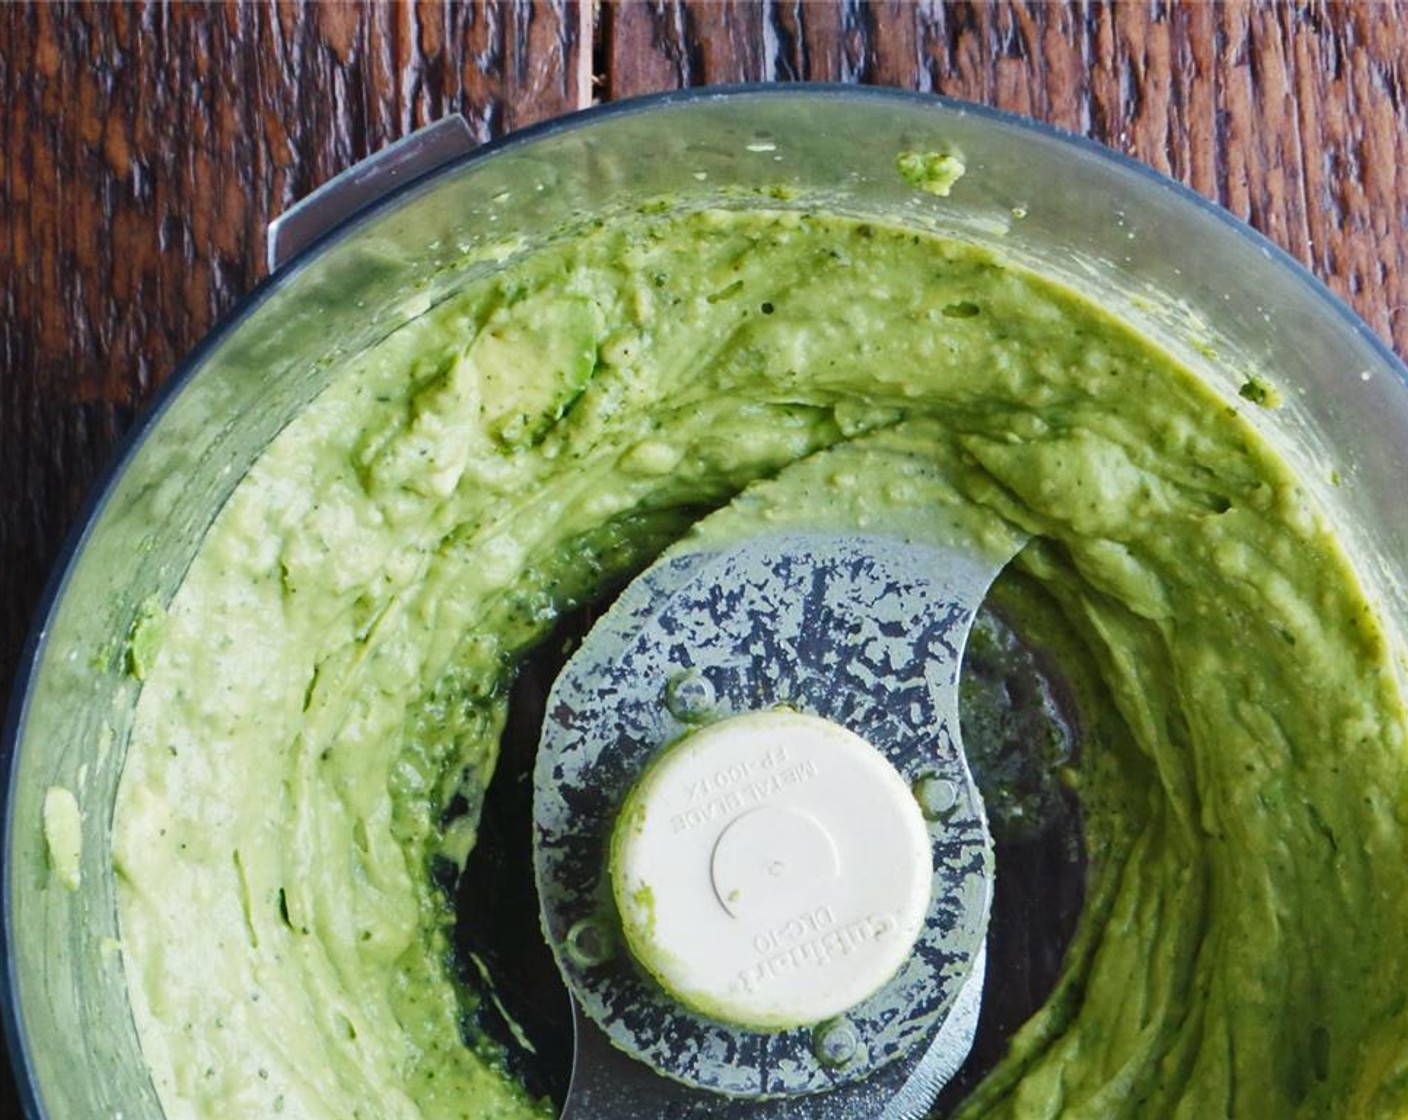 step 2 Halve, peel, and remove the pit from the Avocados (4). Add them to a food processor with the Basil Pesto (1/4 cup) and pulse until smooth and creamy.